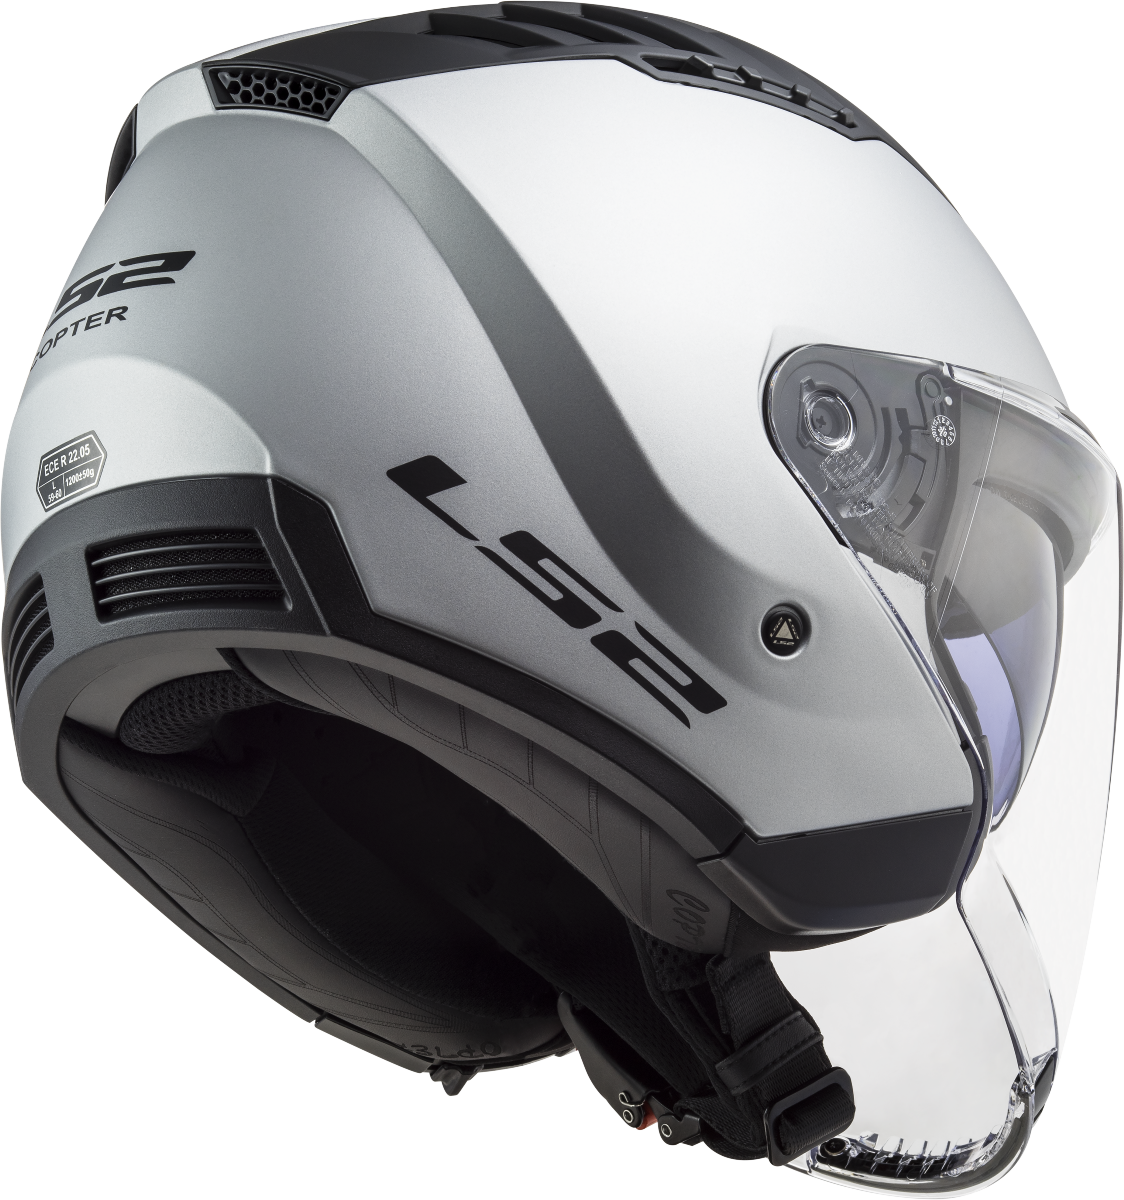 Casco LS2 OF600 COPTER SOLID PLATA MATE 3